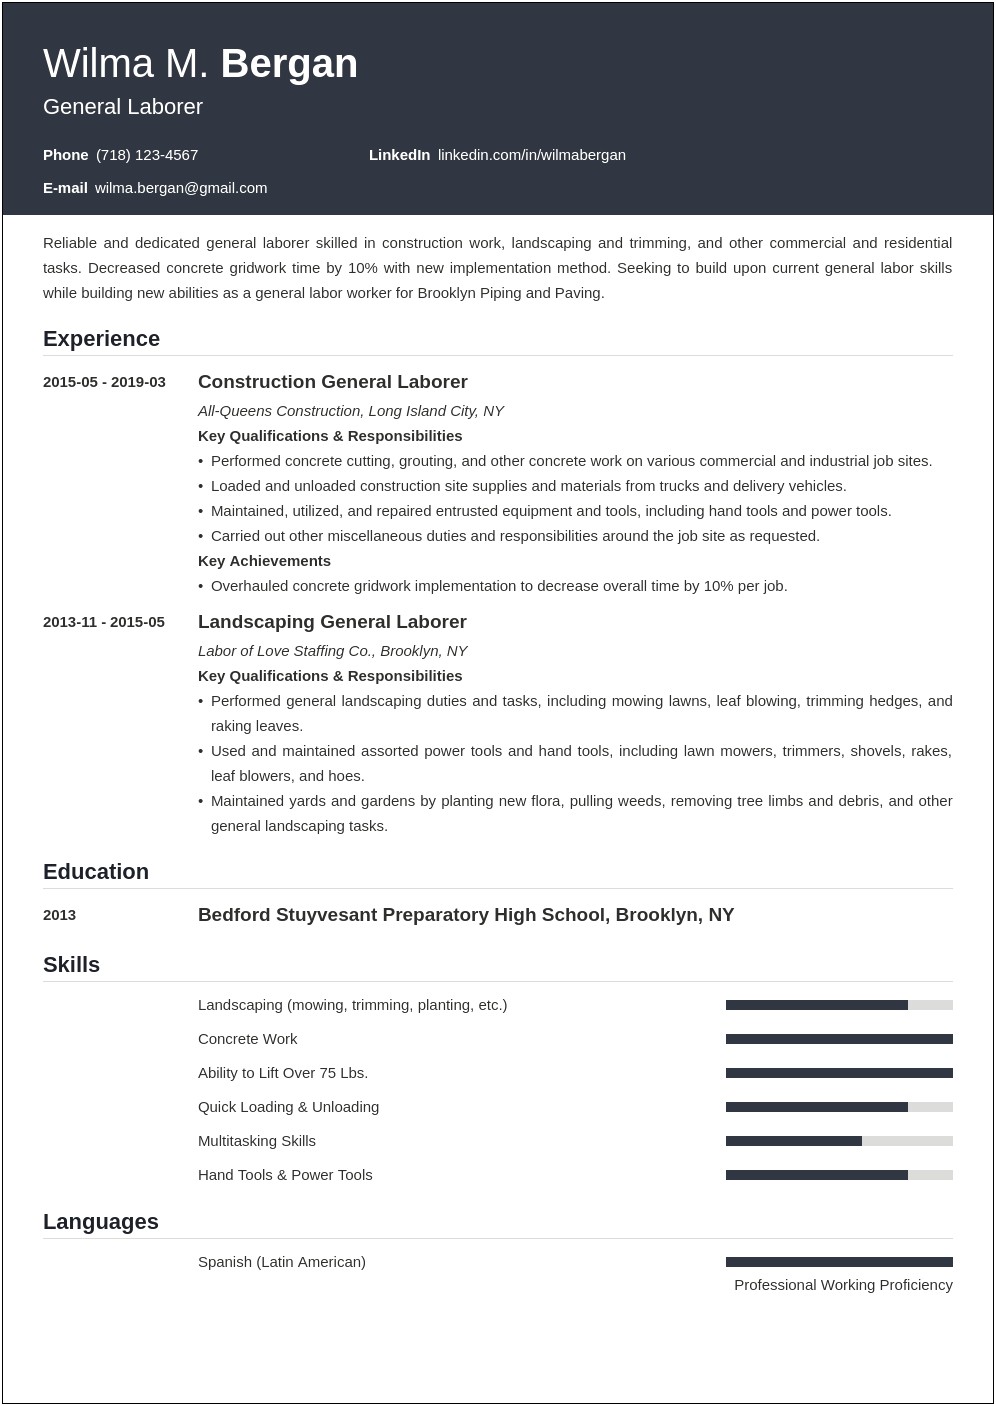 Resume Objective For Labor Work